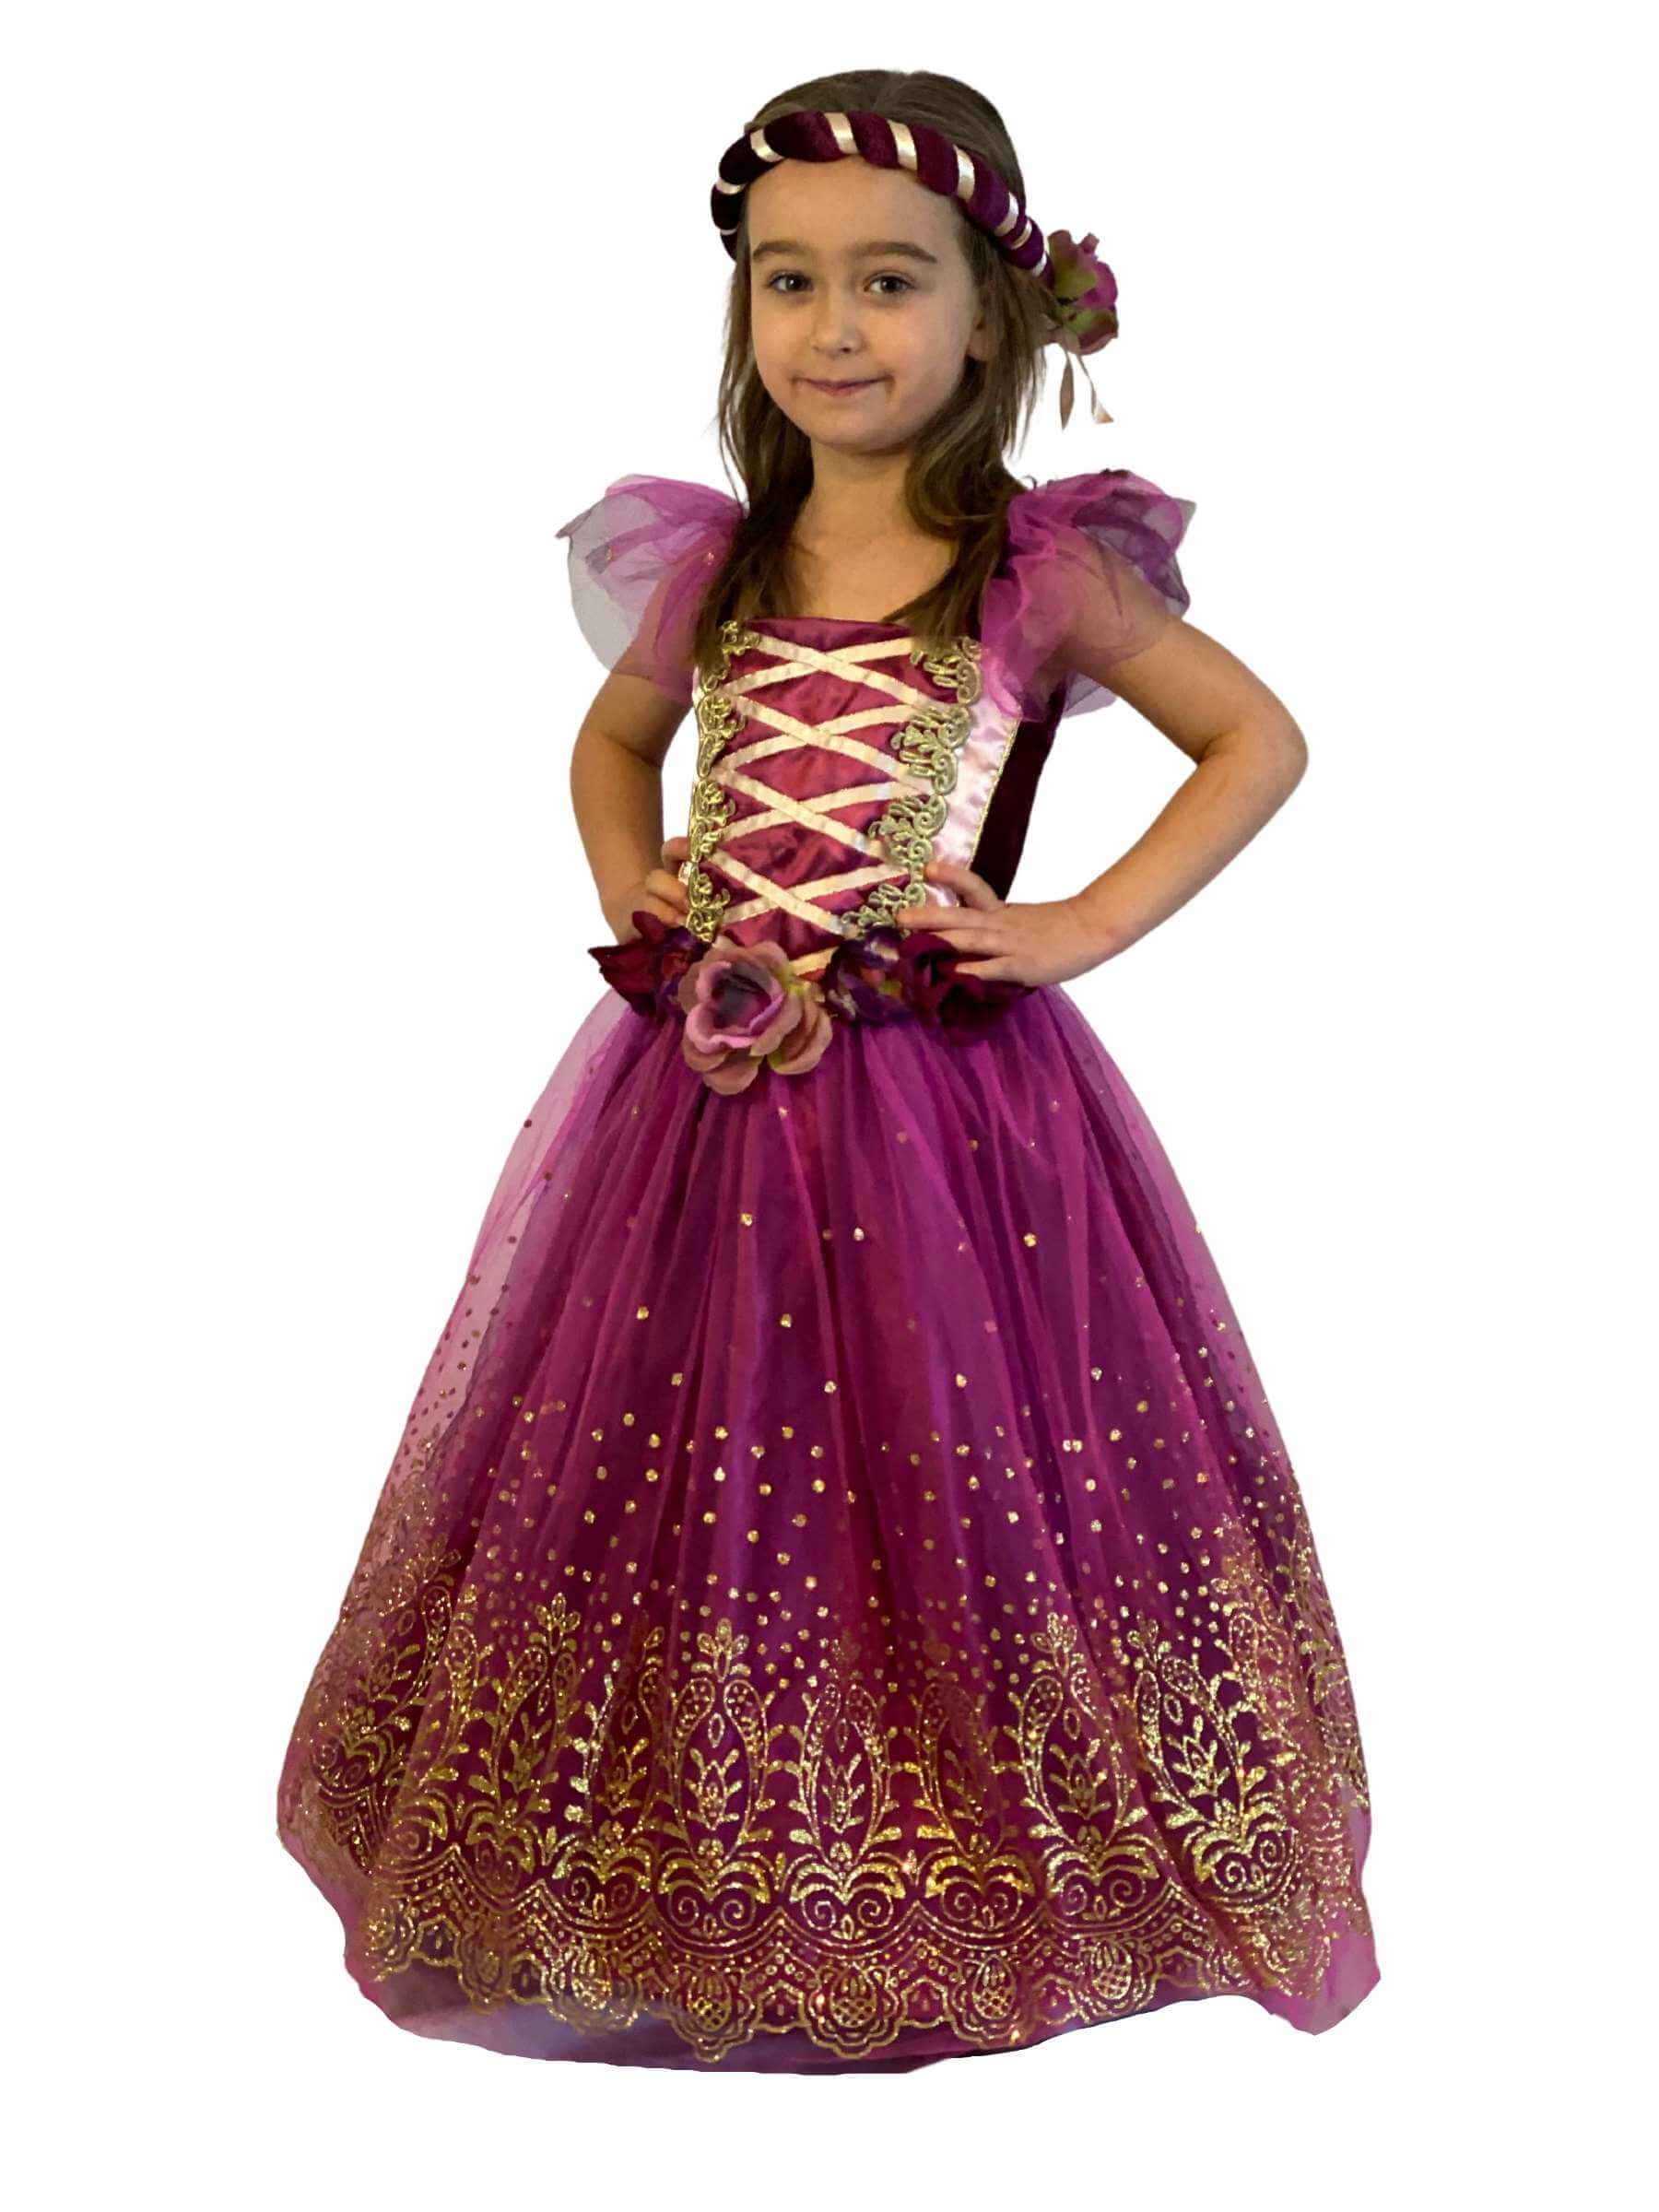 Girl wearing a plum coloured dress with gold details including gold glittered pattern to the skirt. The girl also wears a matching plum and gold headband.